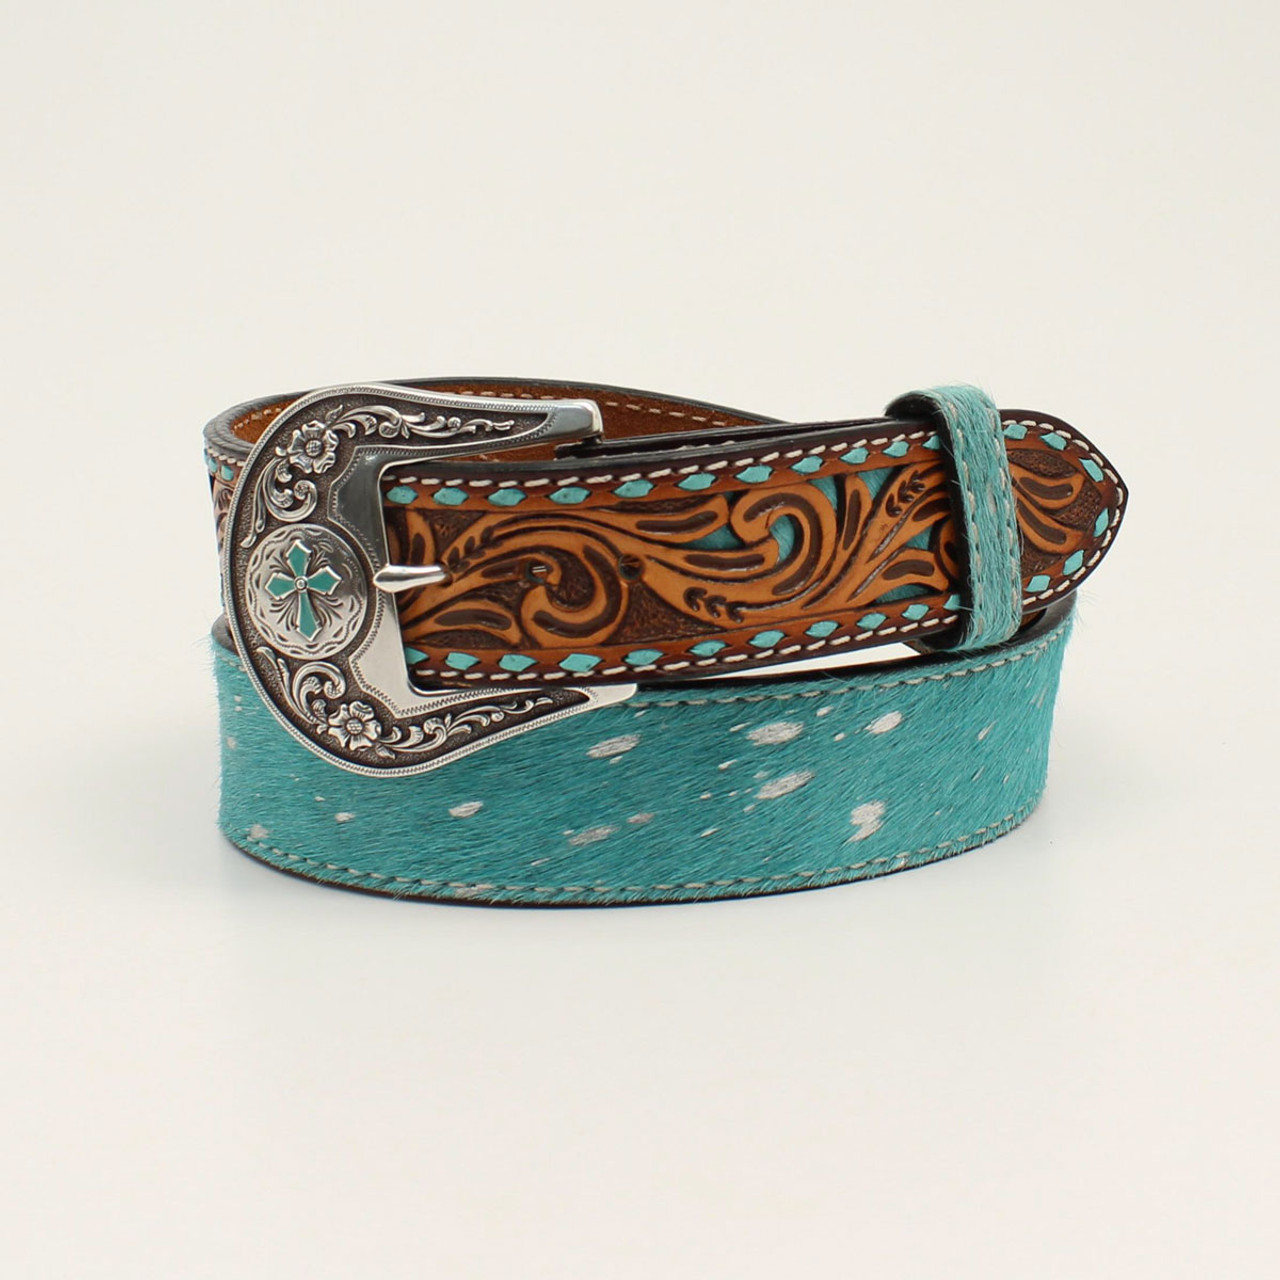 TEEN TRIOMPHE BELT IN TAURILLON LEATHER - CALIFORNIA BLUE